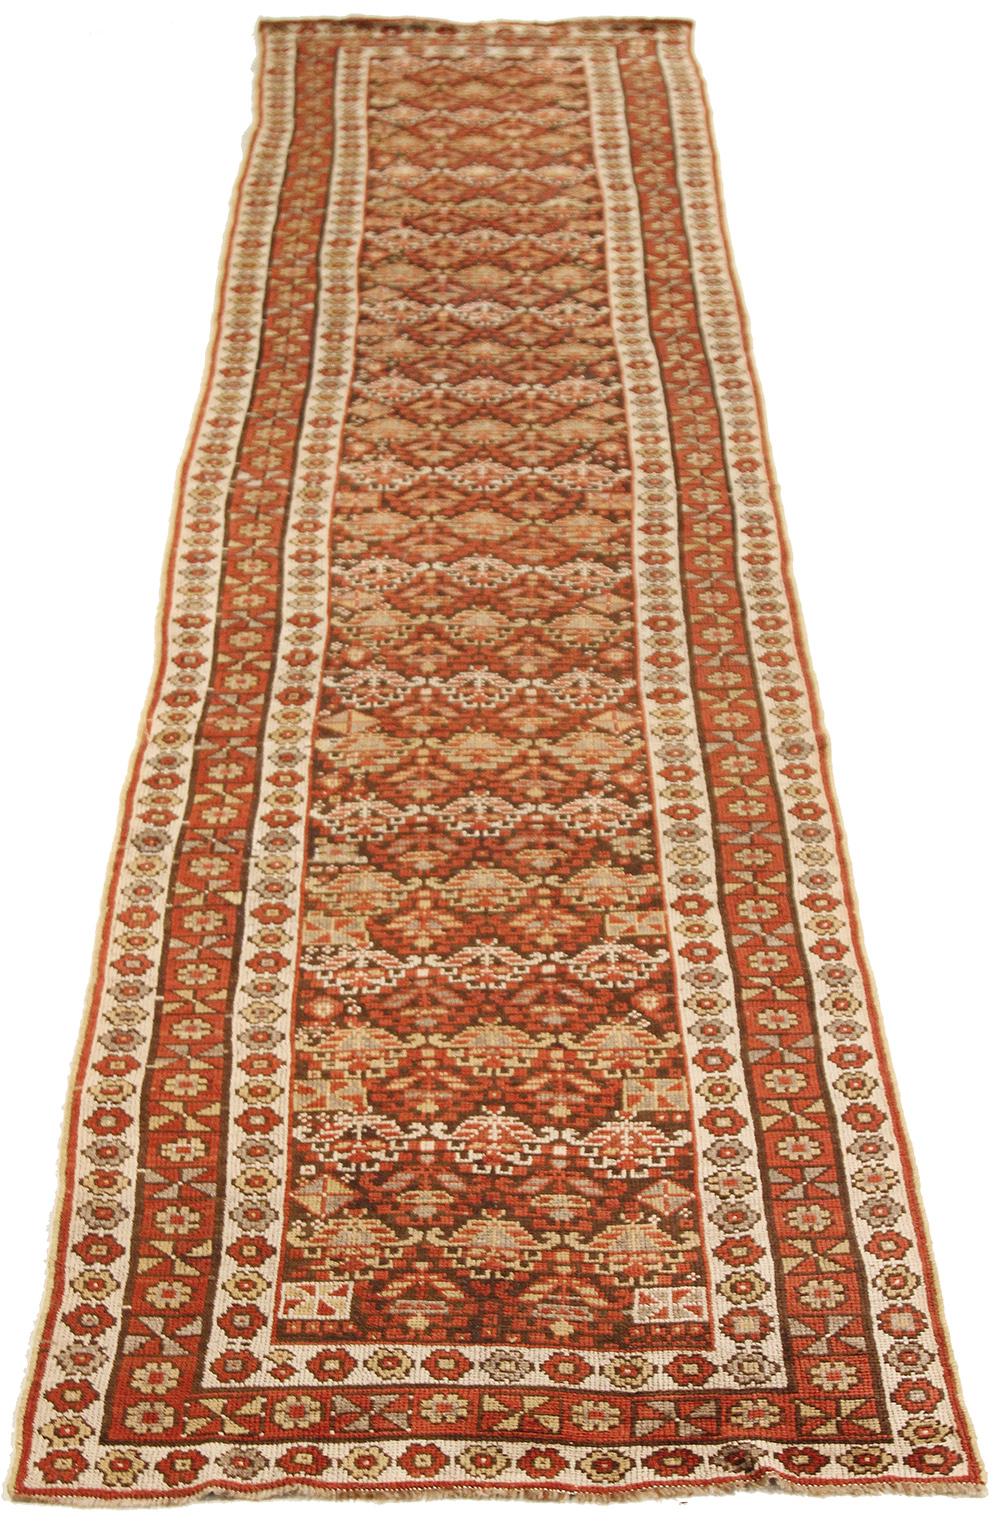 Antique Azerbaijan runner rug handwoven from the finest sheep’s wool and colored with all-natural vegetable dyes that are safe for humans and pets. It’s a traditional Azerbaijani design featuring mixed floral and botanical details over a deep red